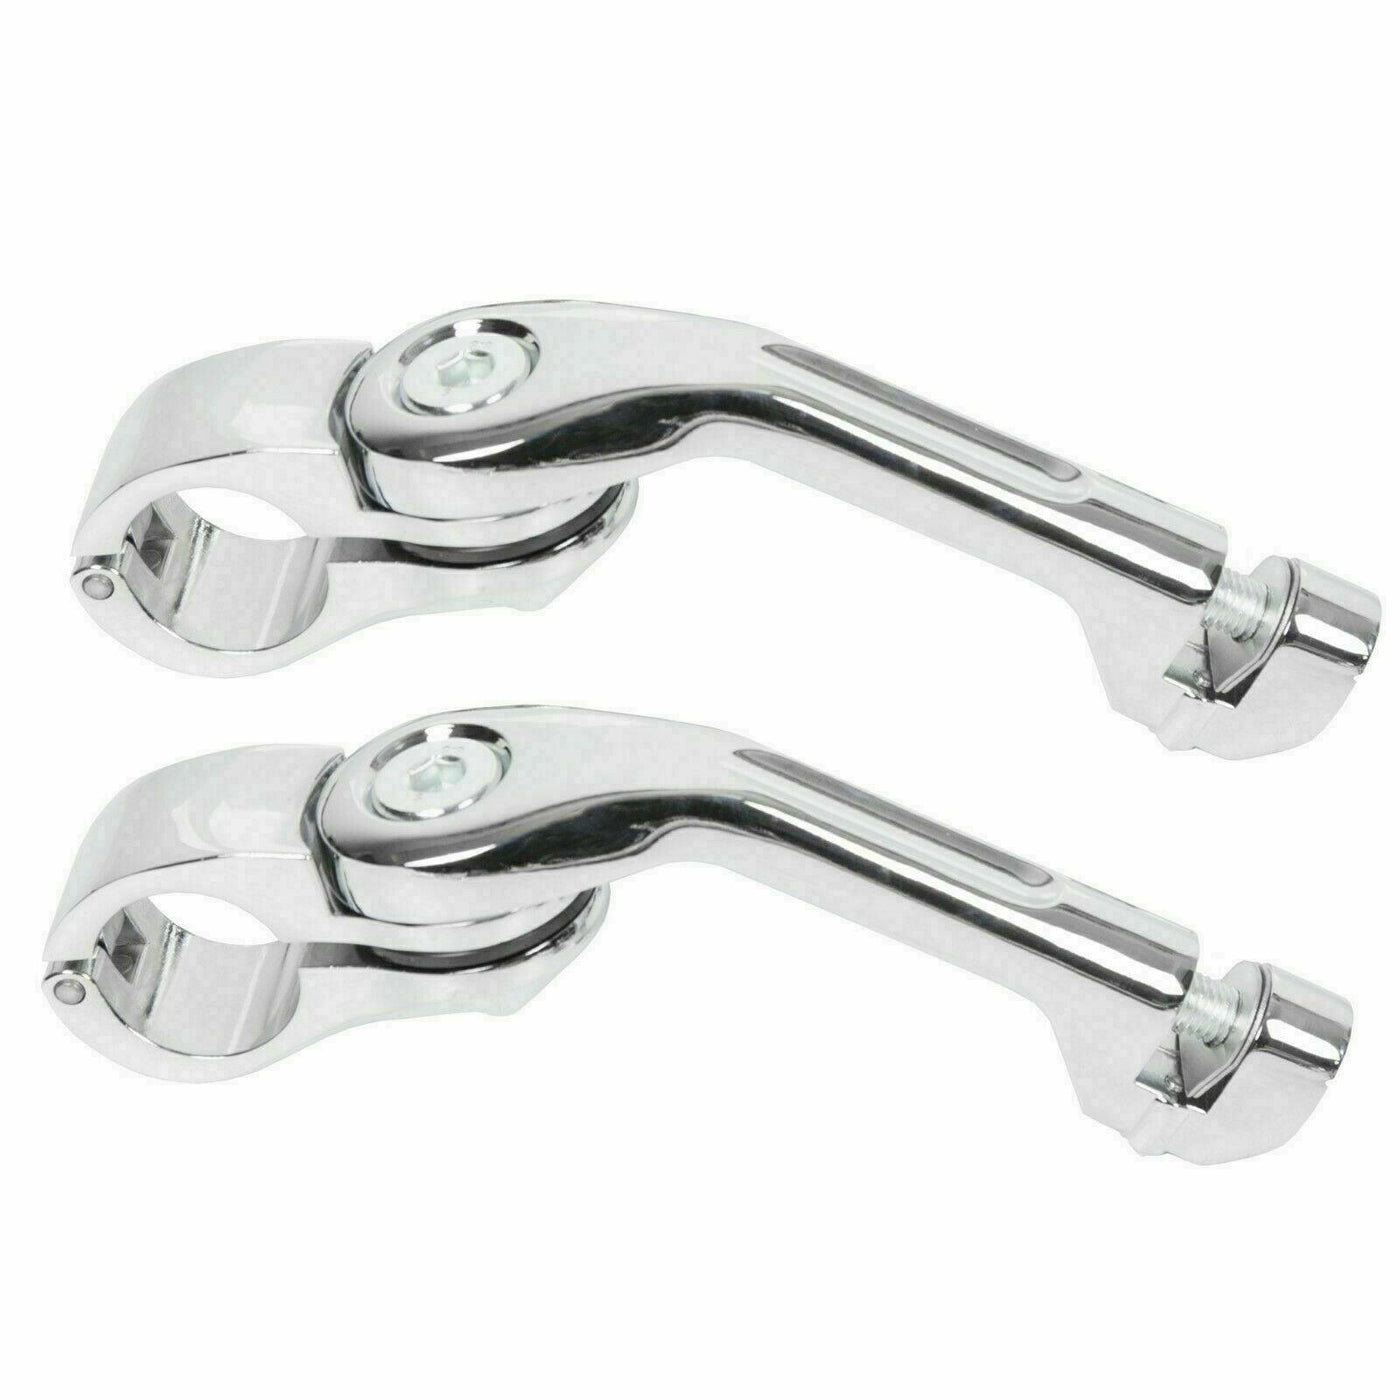 Chrome Long Highway Foot Pegs 1-1/4" Crash Bar For Harley Street Glide Road King - Moto Life Products